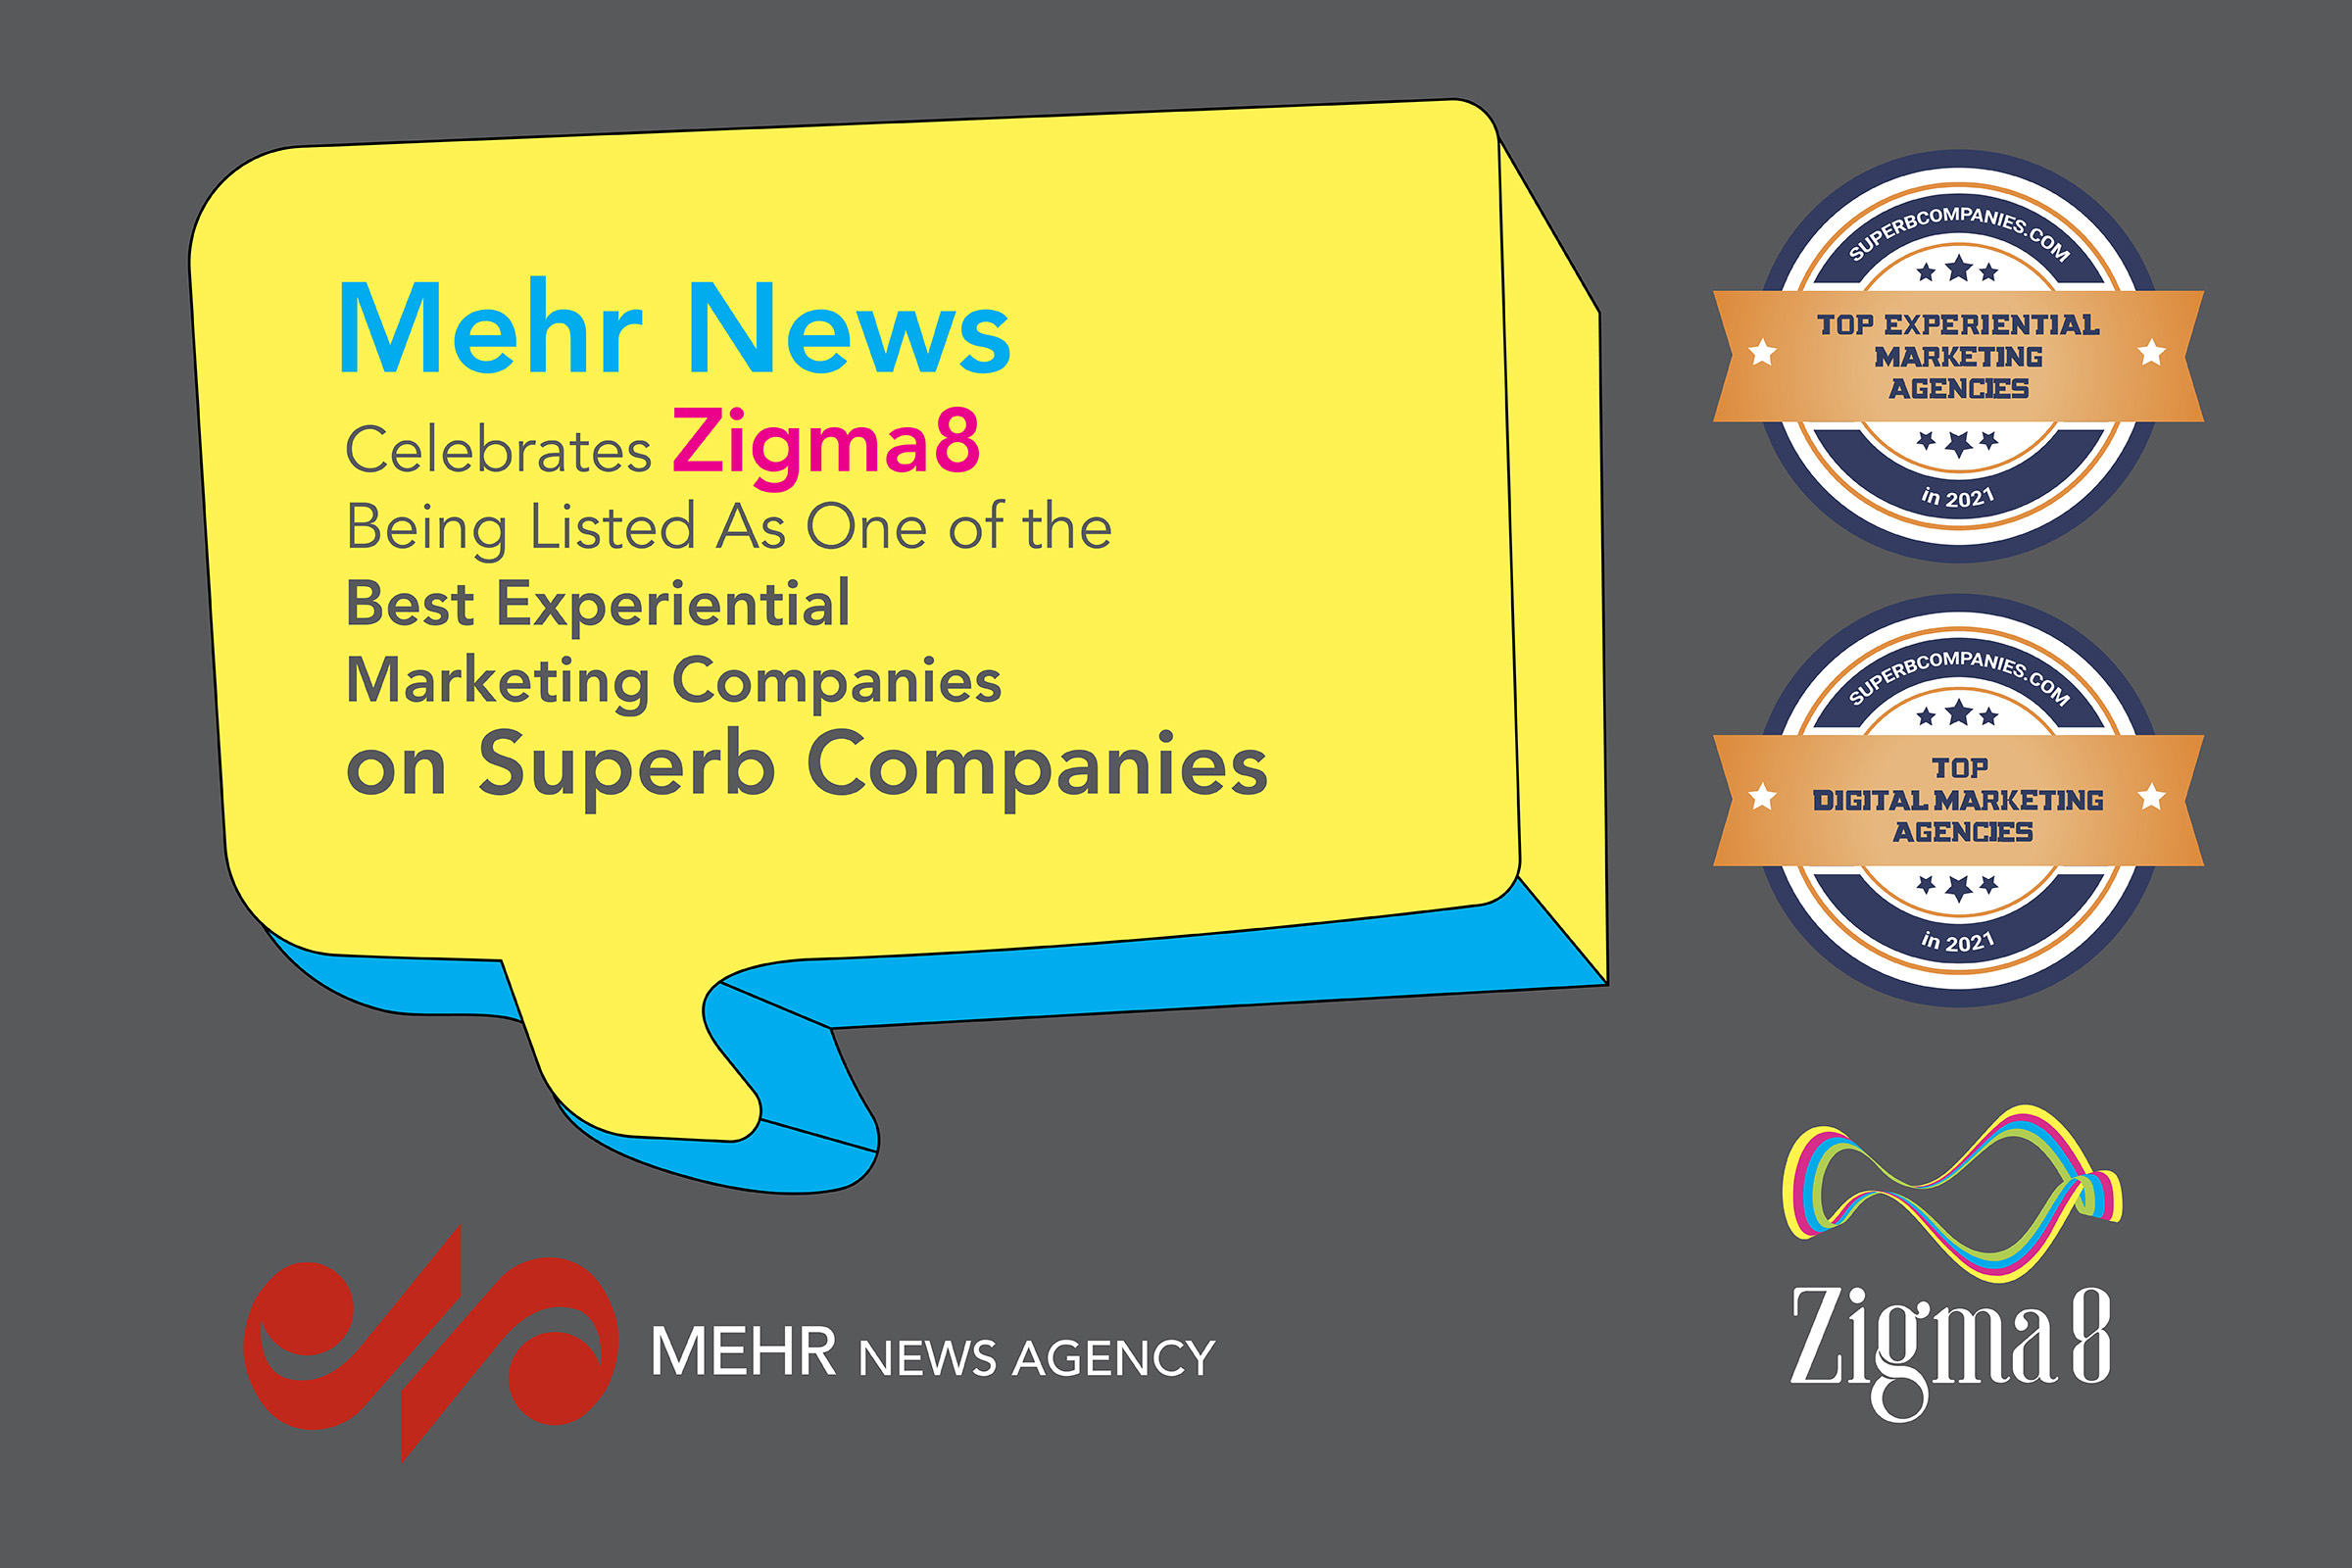 Interestingly, Mehr News Agency, a known media center in Iran, celebrated Zigma8's international recognition with a comprehensive article explaining how it would be to work with an advertising agency in Iran that aced so many projects on an international scale.